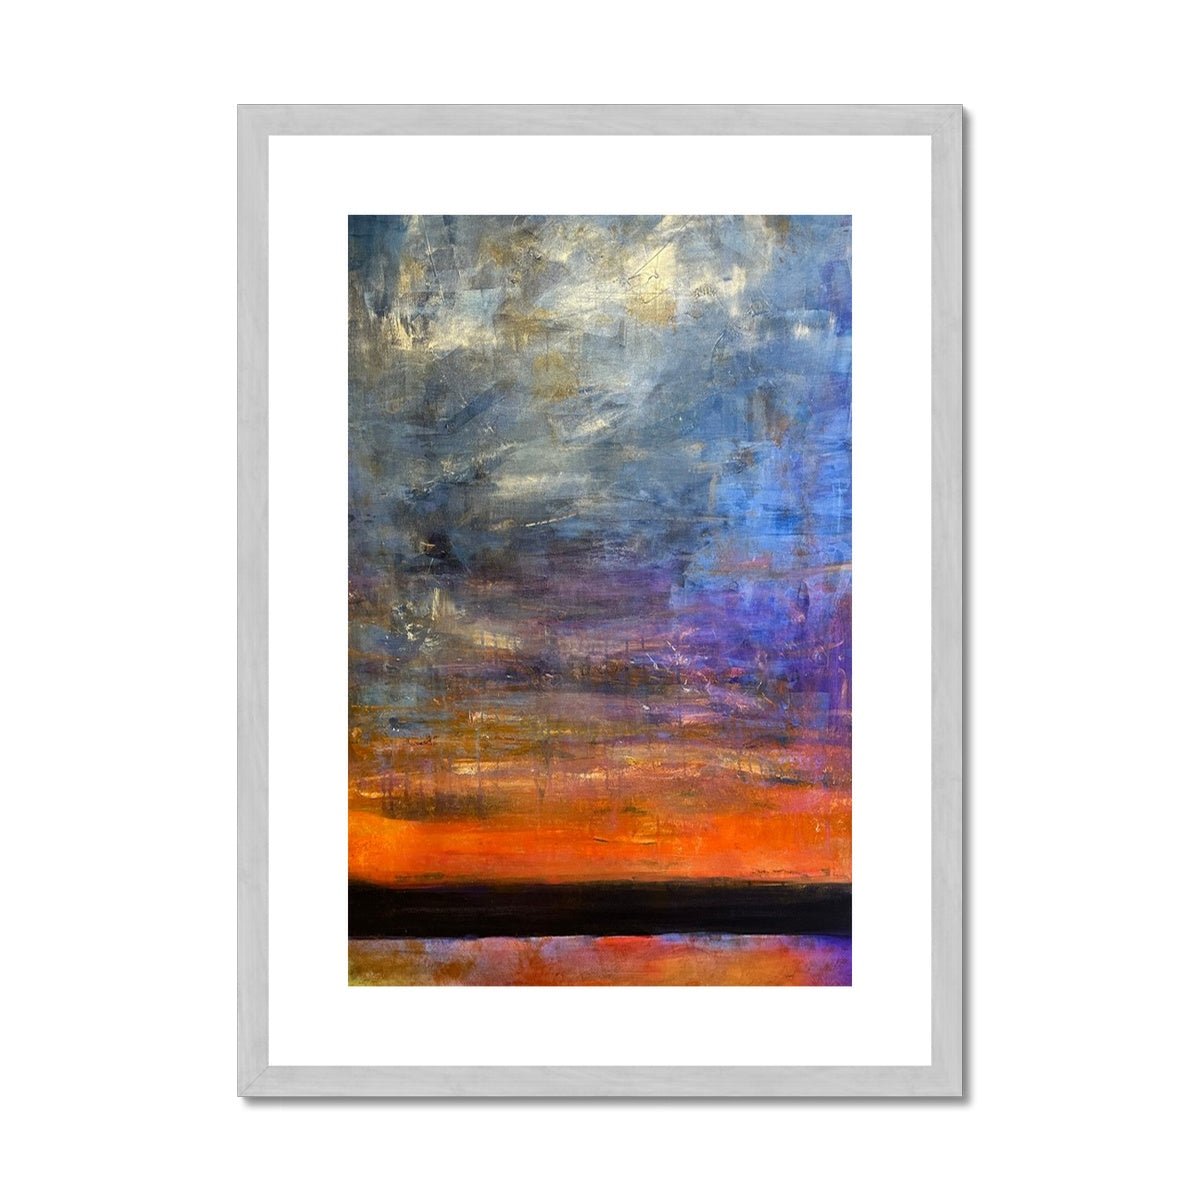 Horizon Dreams Abstract Painting | Antique Framed & Mounted Prints From Scotland-Antique Framed & Mounted Prints-Abstract & Impressionistic Art Gallery-A2 Portrait-Silver Frame-Paintings, Prints, Homeware, Art Gifts From Scotland By Scottish Artist Kevin Hunter